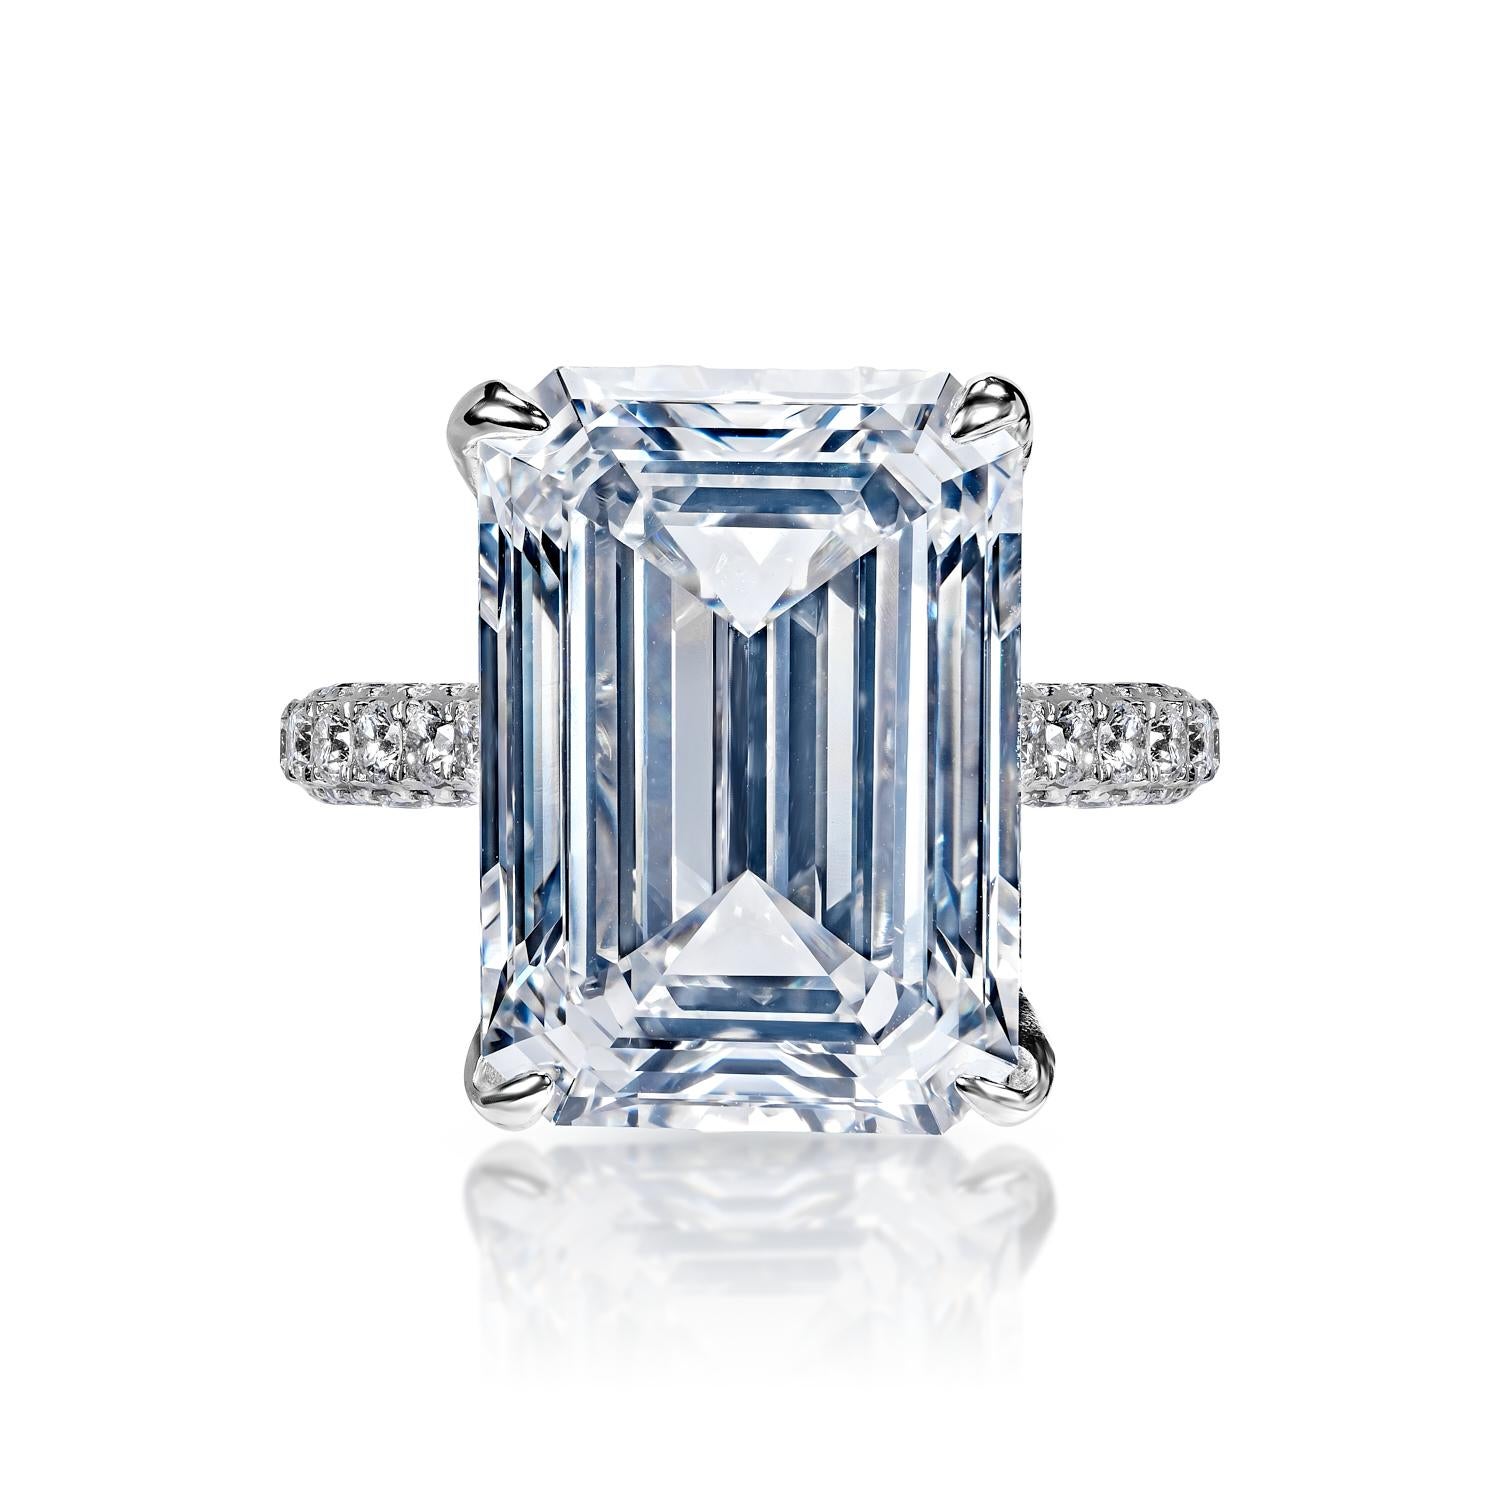 GIA CERTIFIED
Center Diamond:

Carat Weight: 10.40 Carats
Color : E*
Clarity: VVS1
Style: Emerald Cut

*This Diamond has been treated by one or more processes to change its color

Ring:
Metal: 18 Karat White Gold
Settings: 4 Petite Claw Prong &